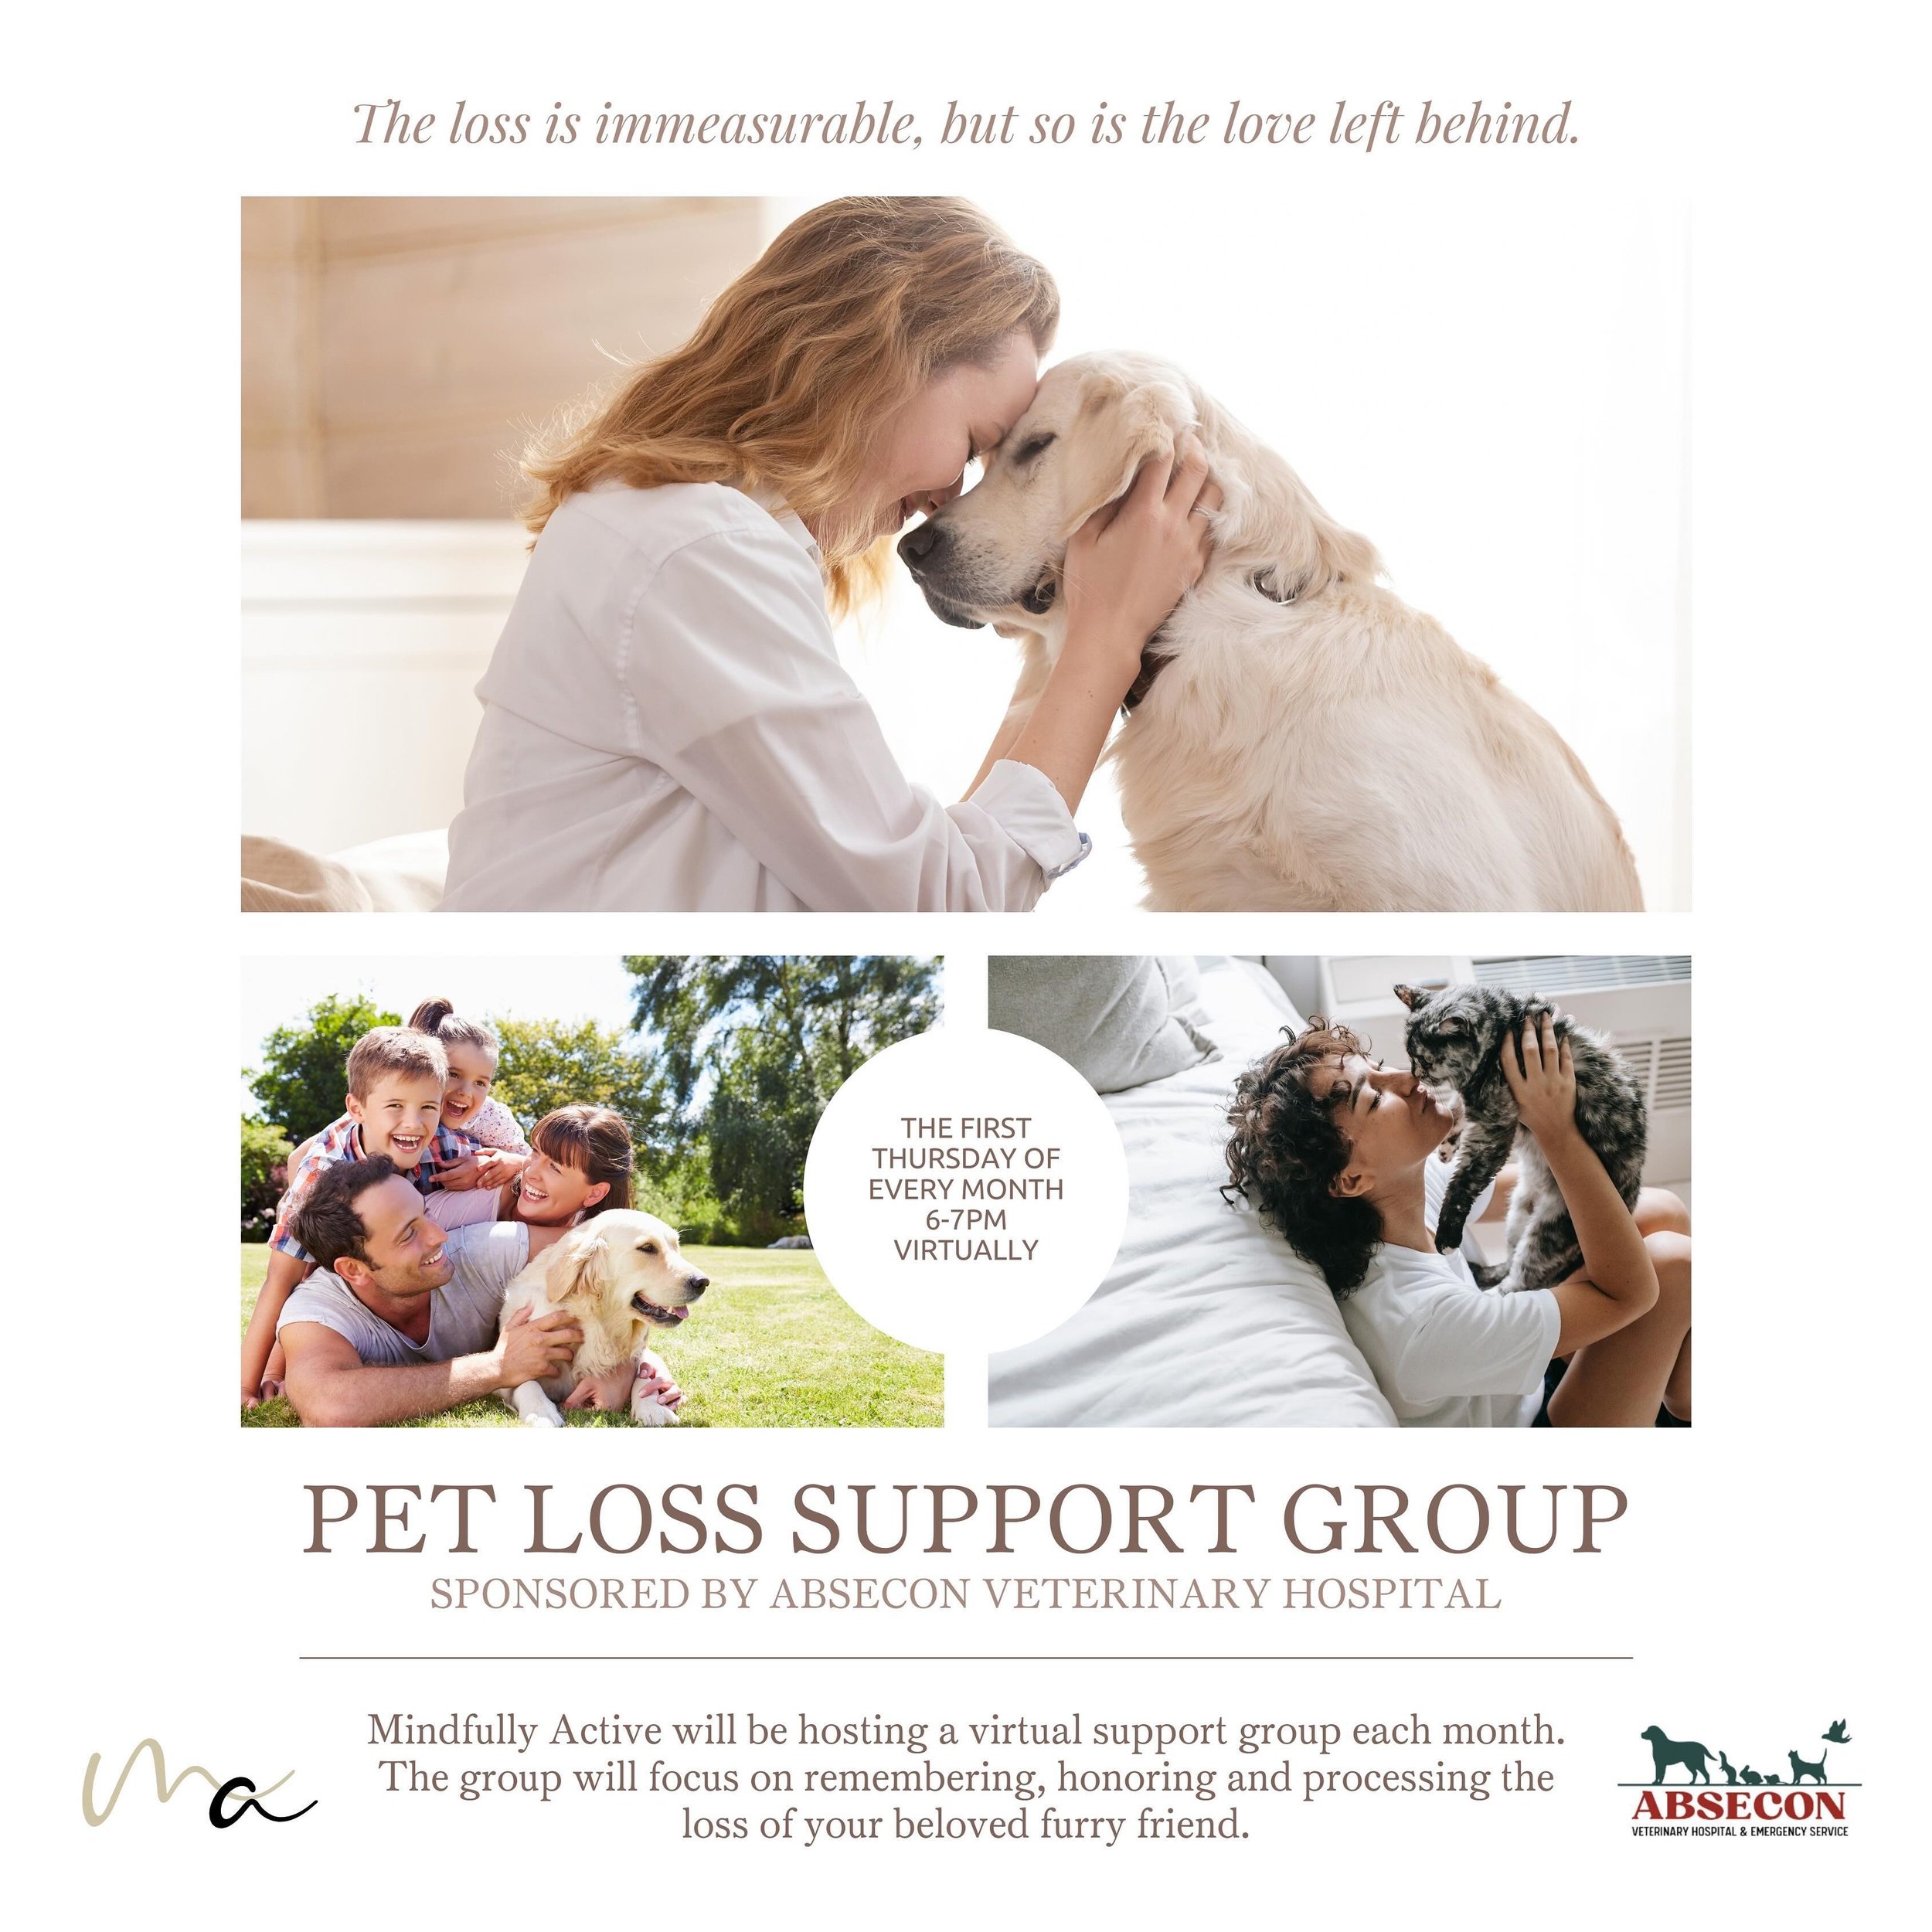 Join our monthly virtual support group sponsored by our amazing friends at @abseconvet 🐾🩵 Anyone is welcome 🤗

To say we&rsquo;re honored to run this group for the community is an understatement.

Sign up with the link in our bio or message us for